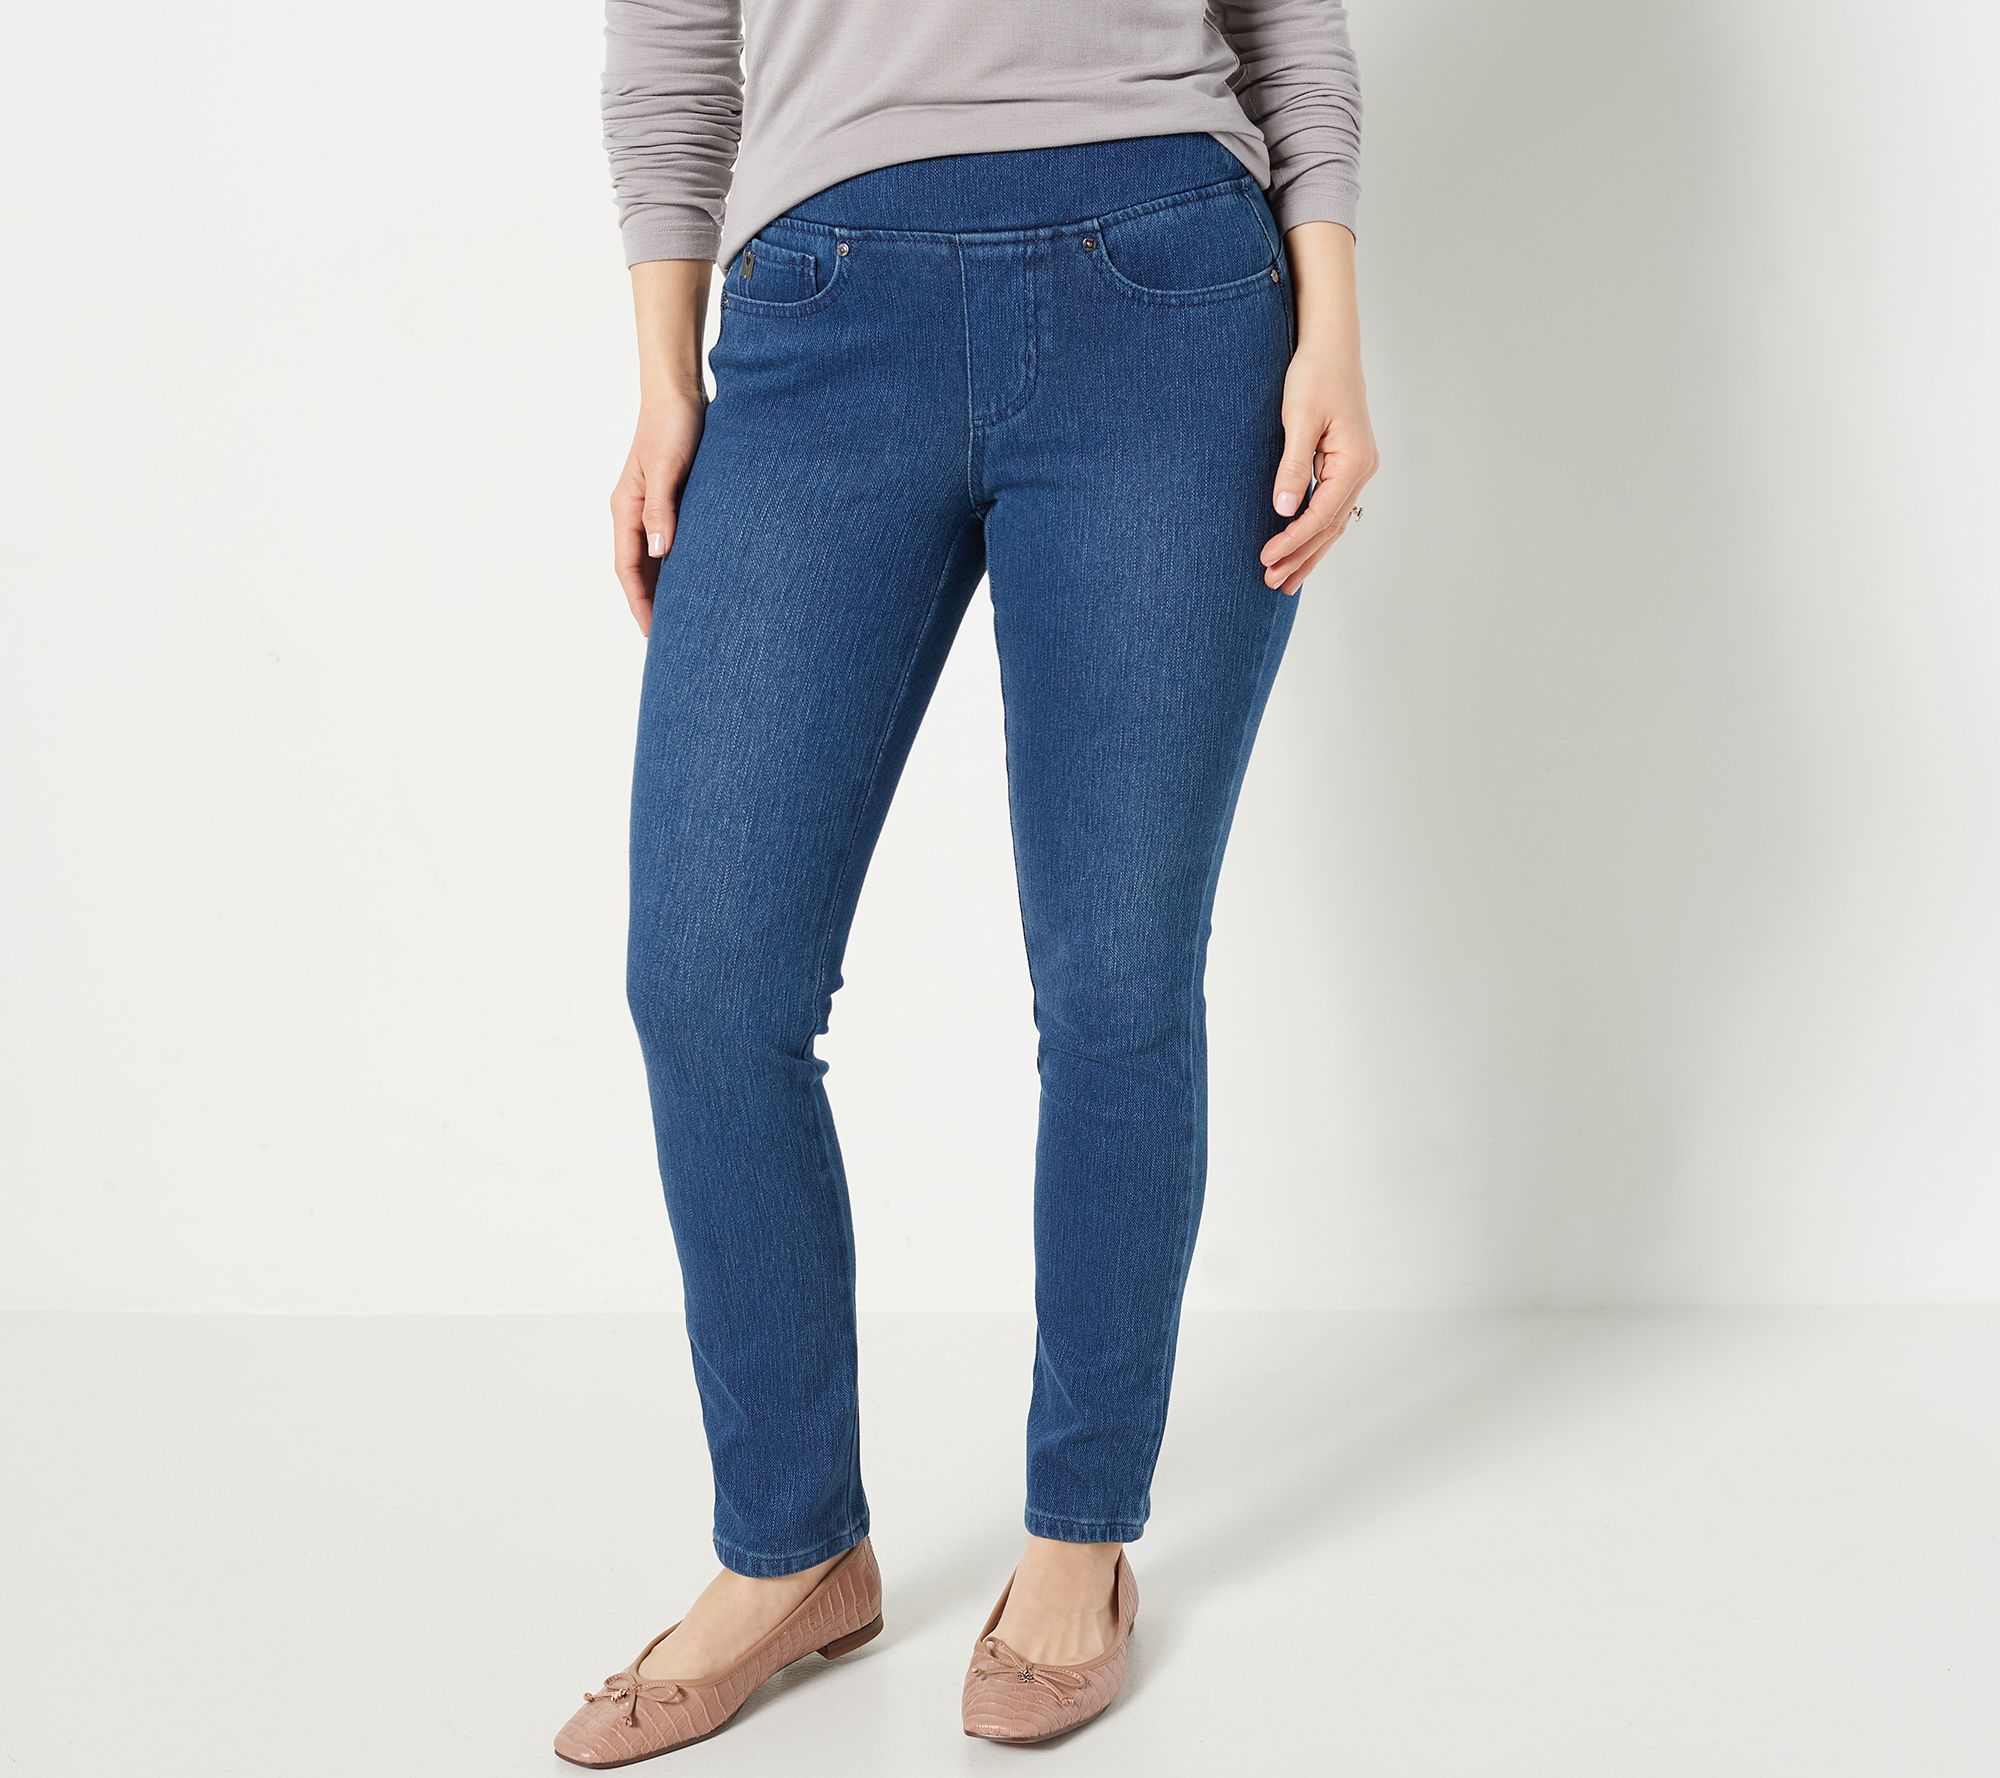 Get Reacquainted With Trouser Jeans This Spring